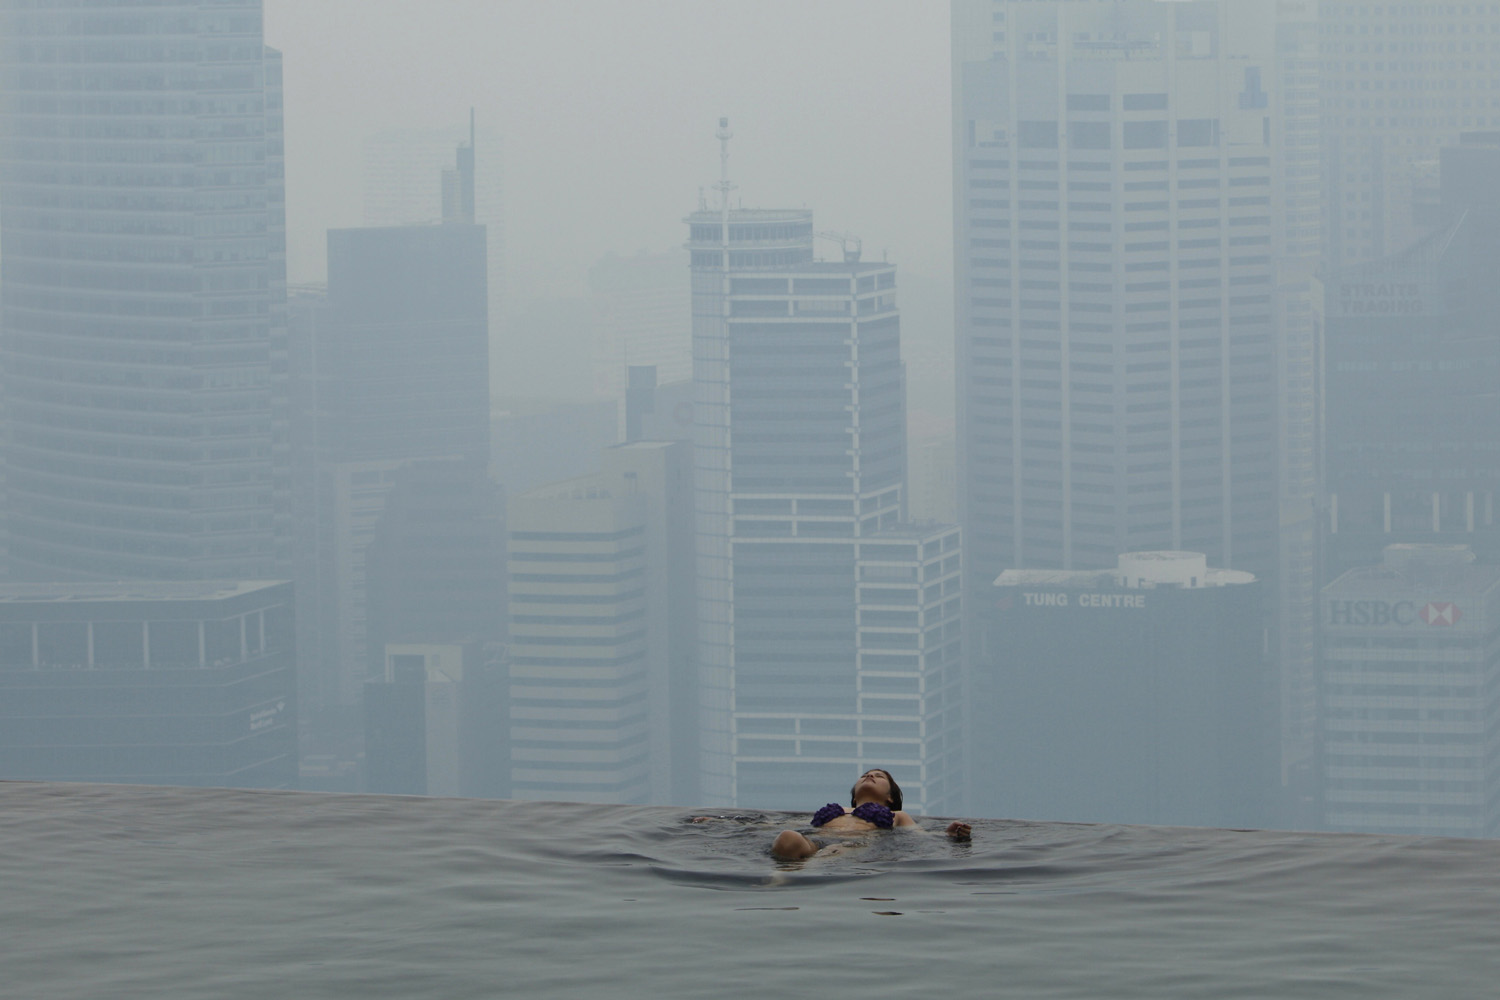 Hotel guest rests in the pool of the Marina Bay Sands Skypark in front of the hazy skyline of Singapore